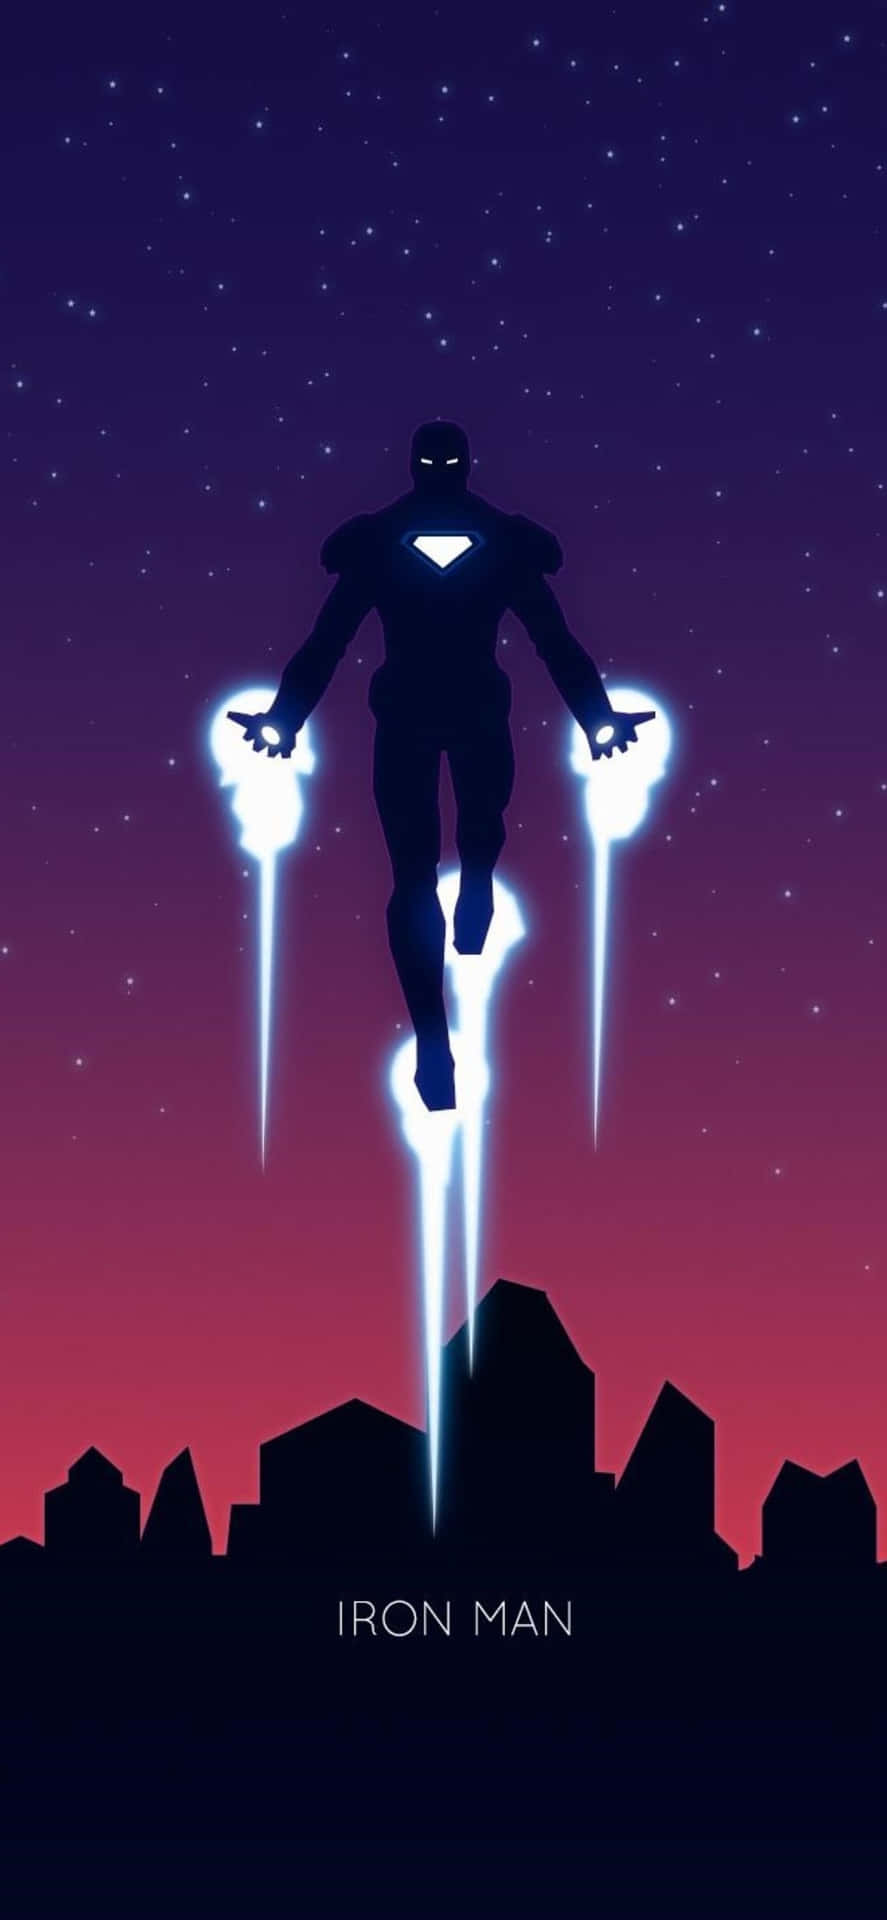 Experience the power of Iron Man on your iPhone! Wallpaper